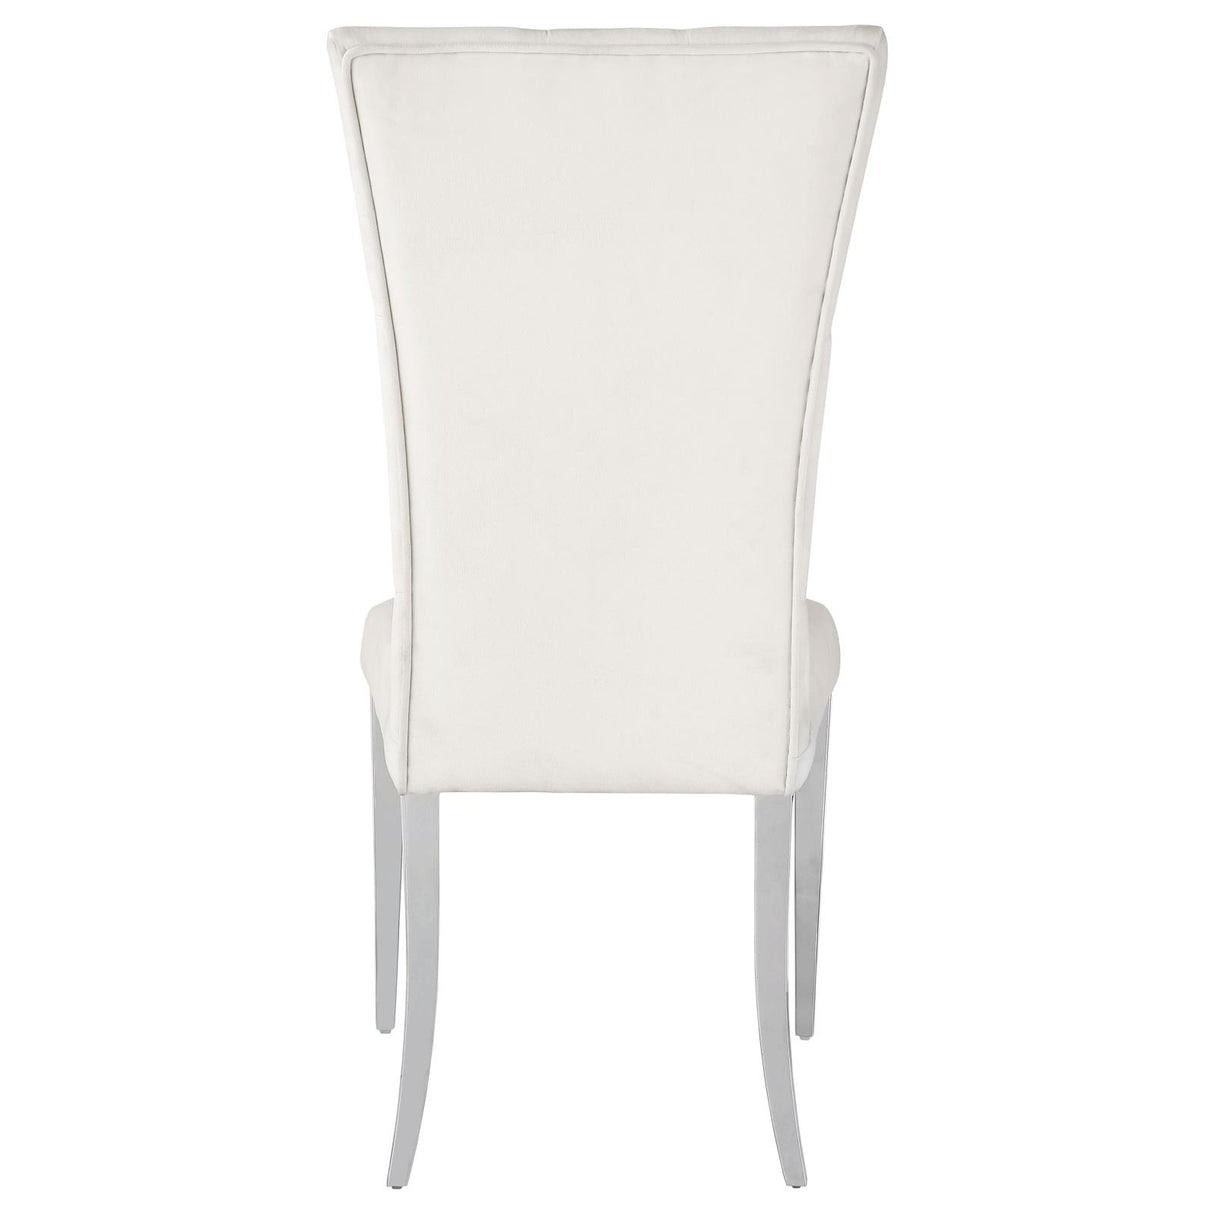 Kerwin Tufted Upholstered Side Chair (Set of 2) White and Chrome - 111102 - Luna Furniture